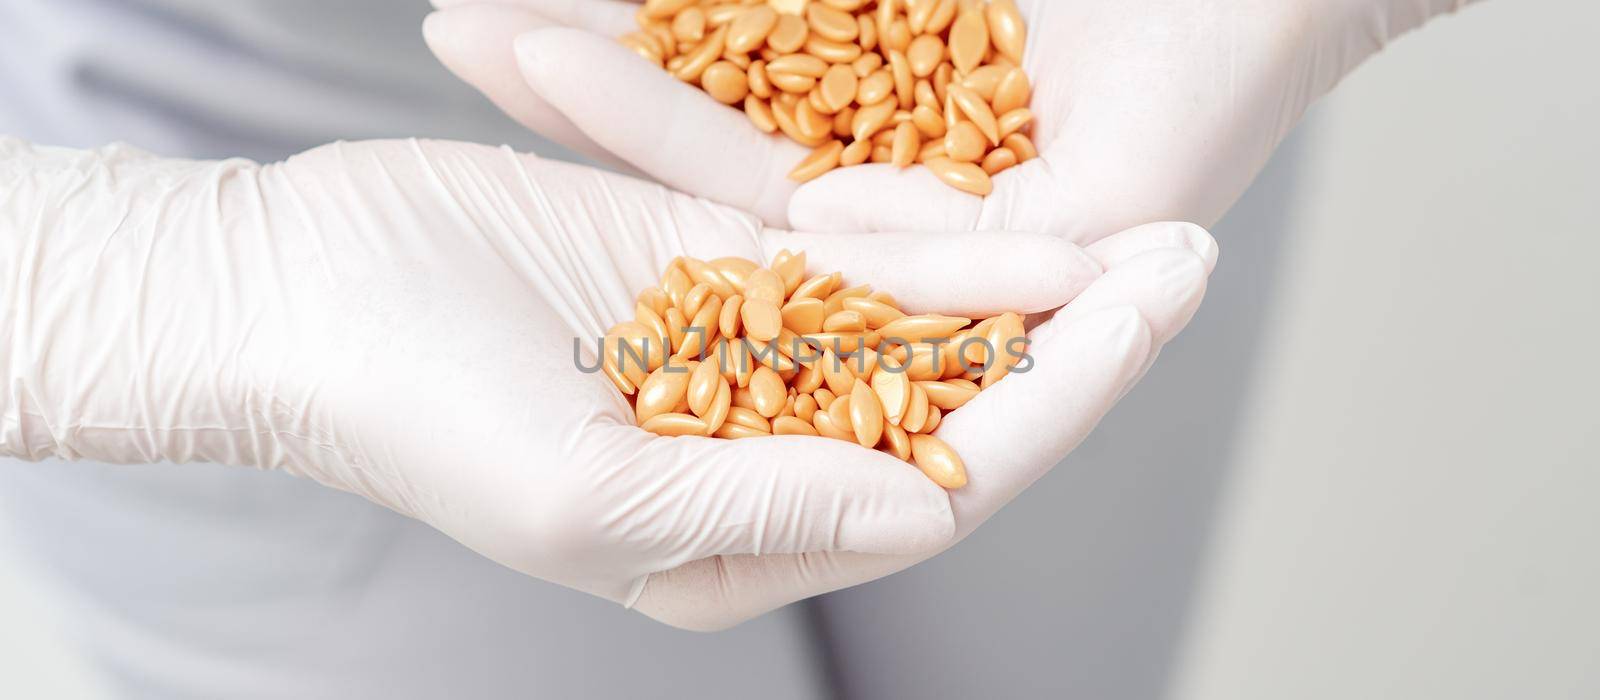 Hard wax beans or seeds in palms of human hands in protective gloves